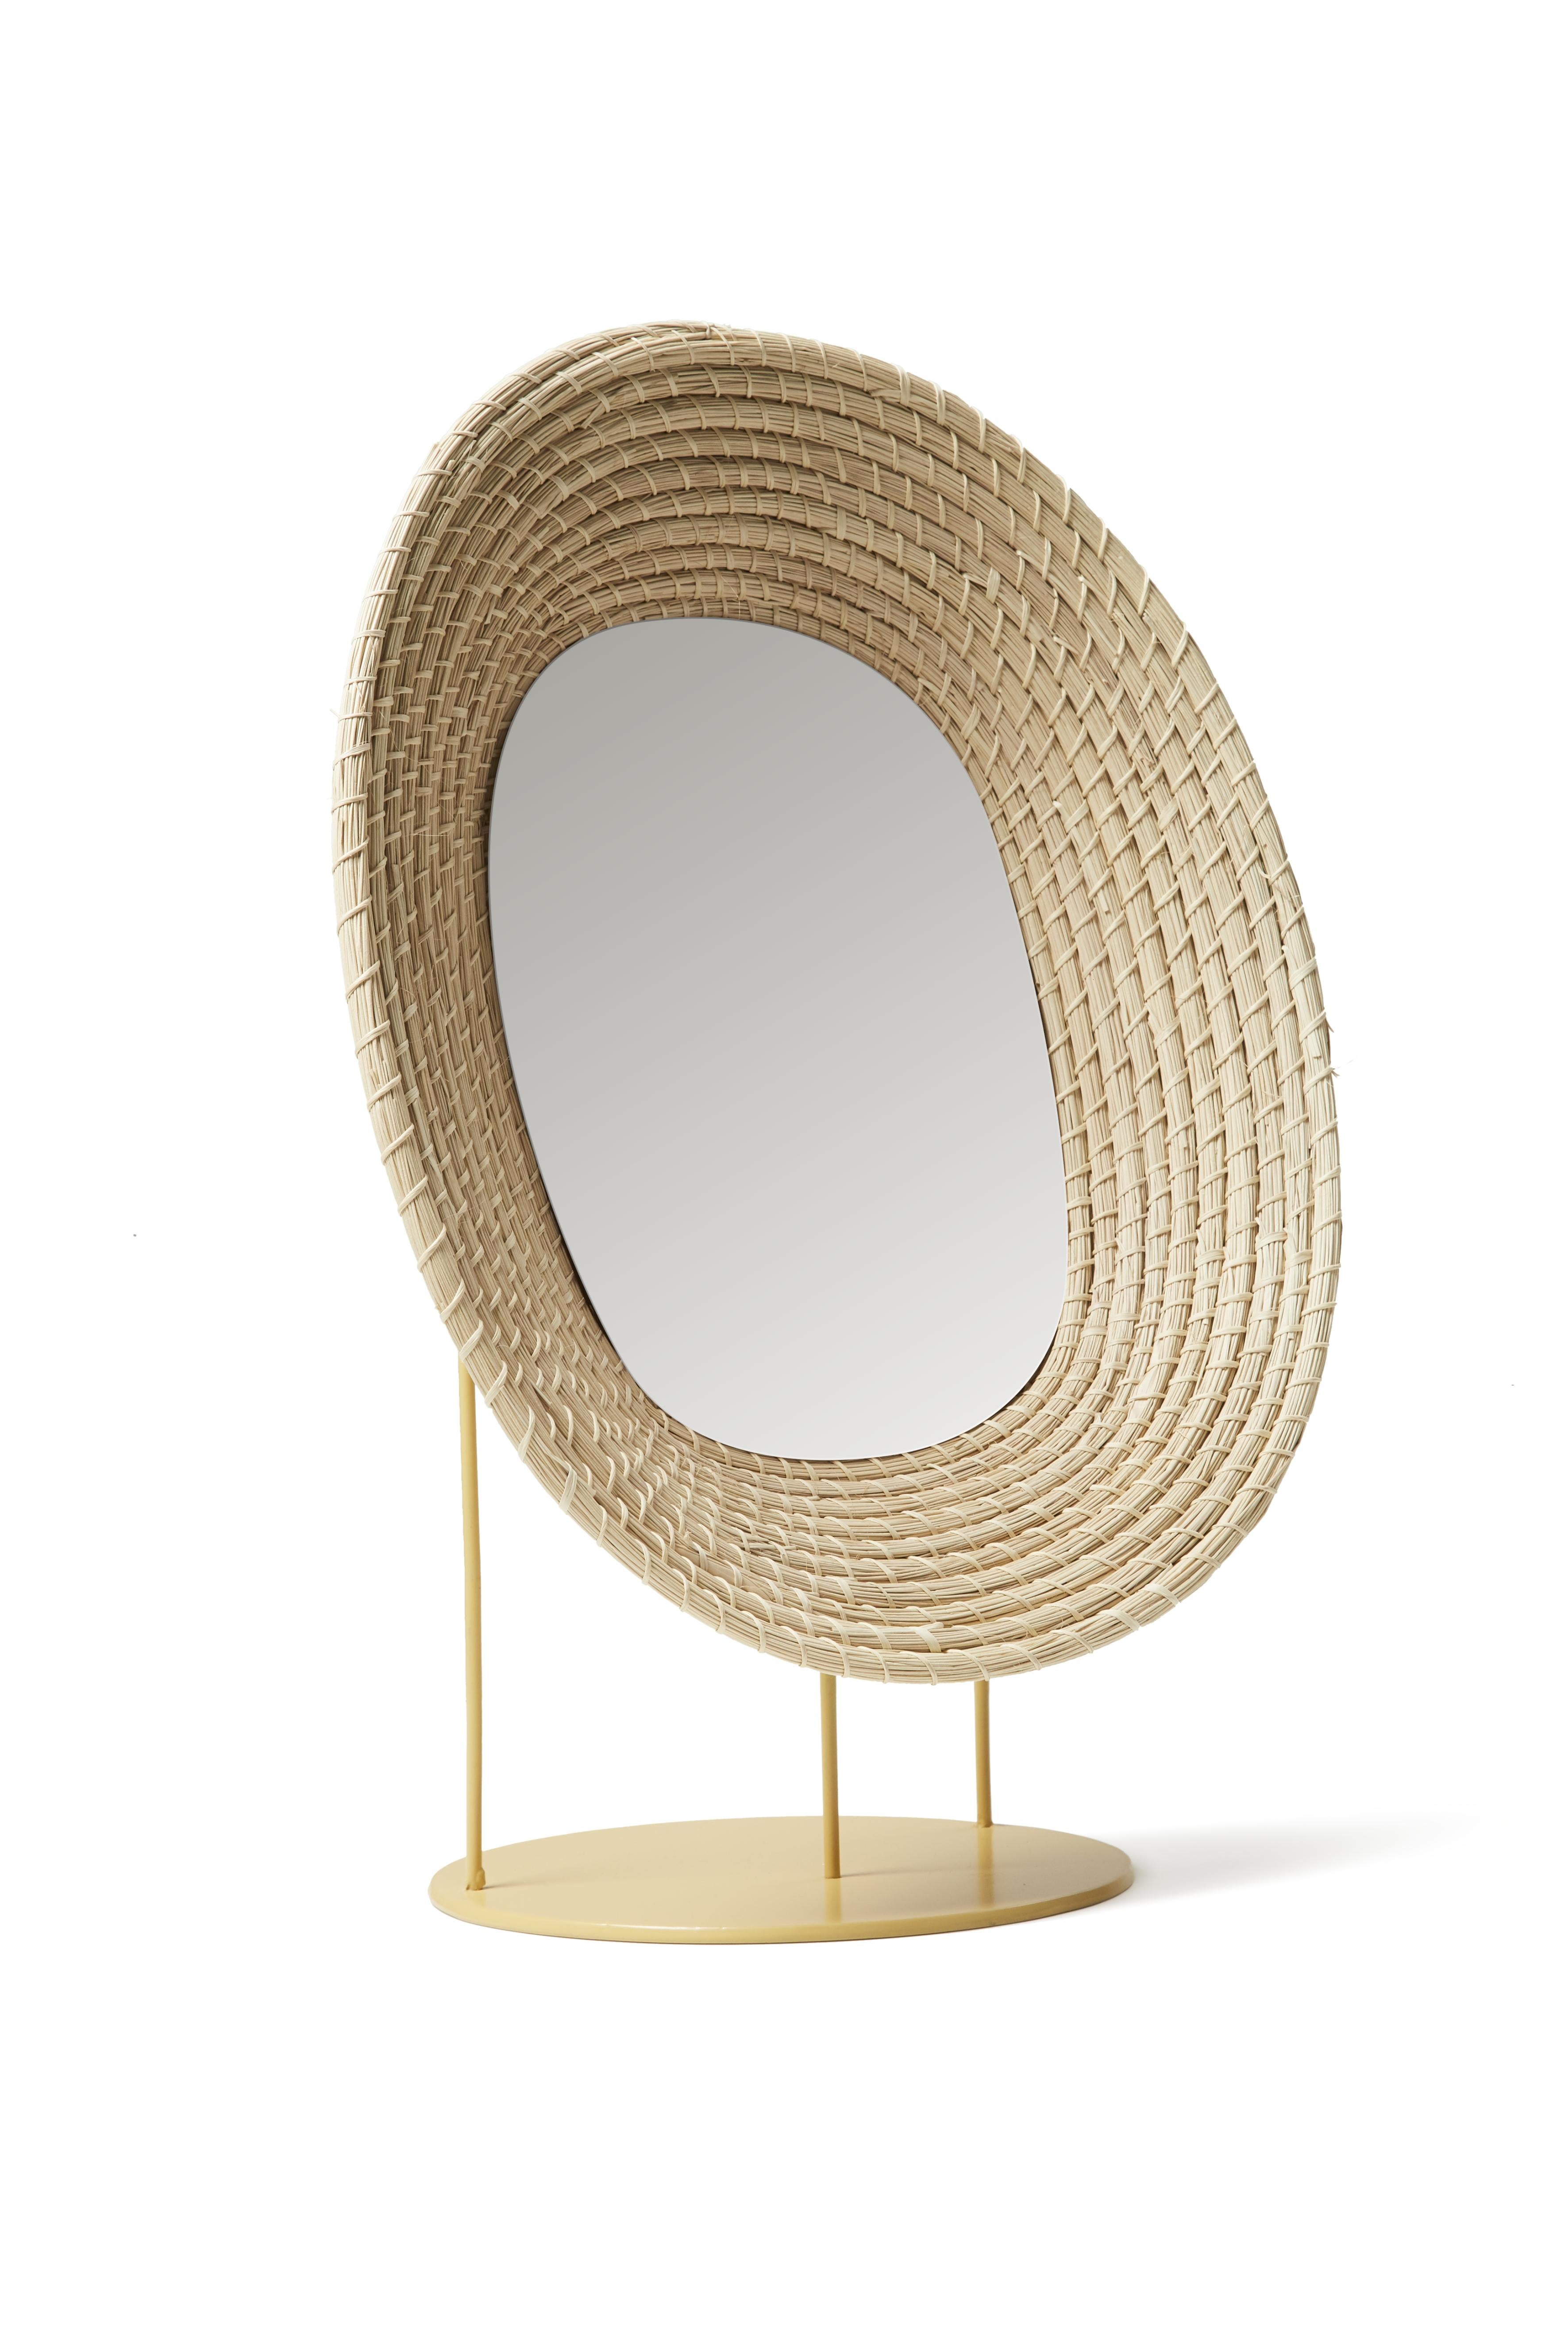 Killa standing mirror by Pauline Deltour
Materials: Galvanized and powder-coated tubular steel frame. Fibers from Iraca palm leaves fiber.
Technique: Hand-woven with natural fibers in Colombia. Natural dyed. 
Dimensions: W 34 x H 46 cm